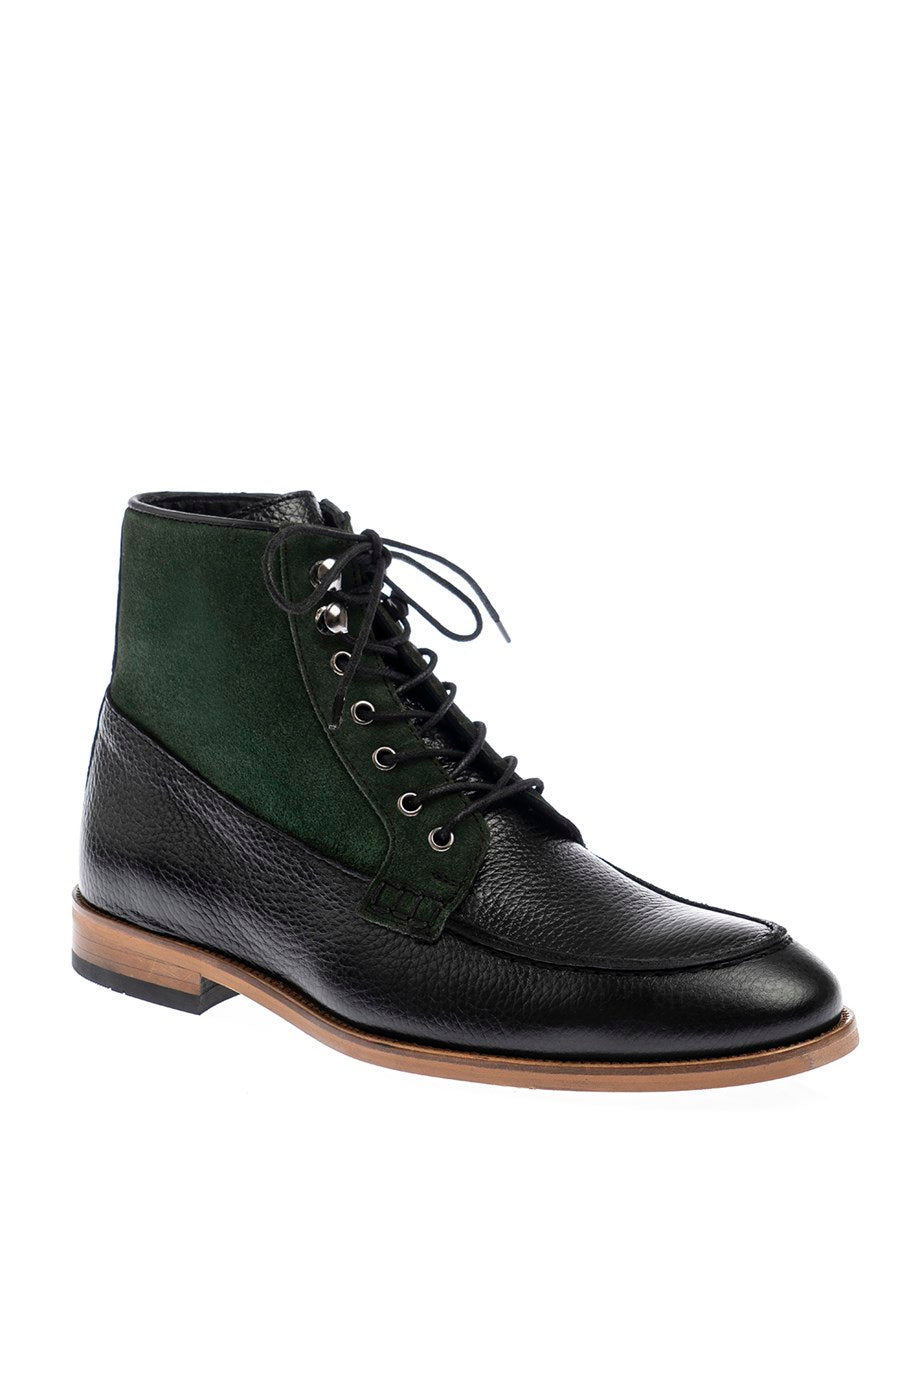 Special Design Genuine Leather Boots - MENSTYLEWITH